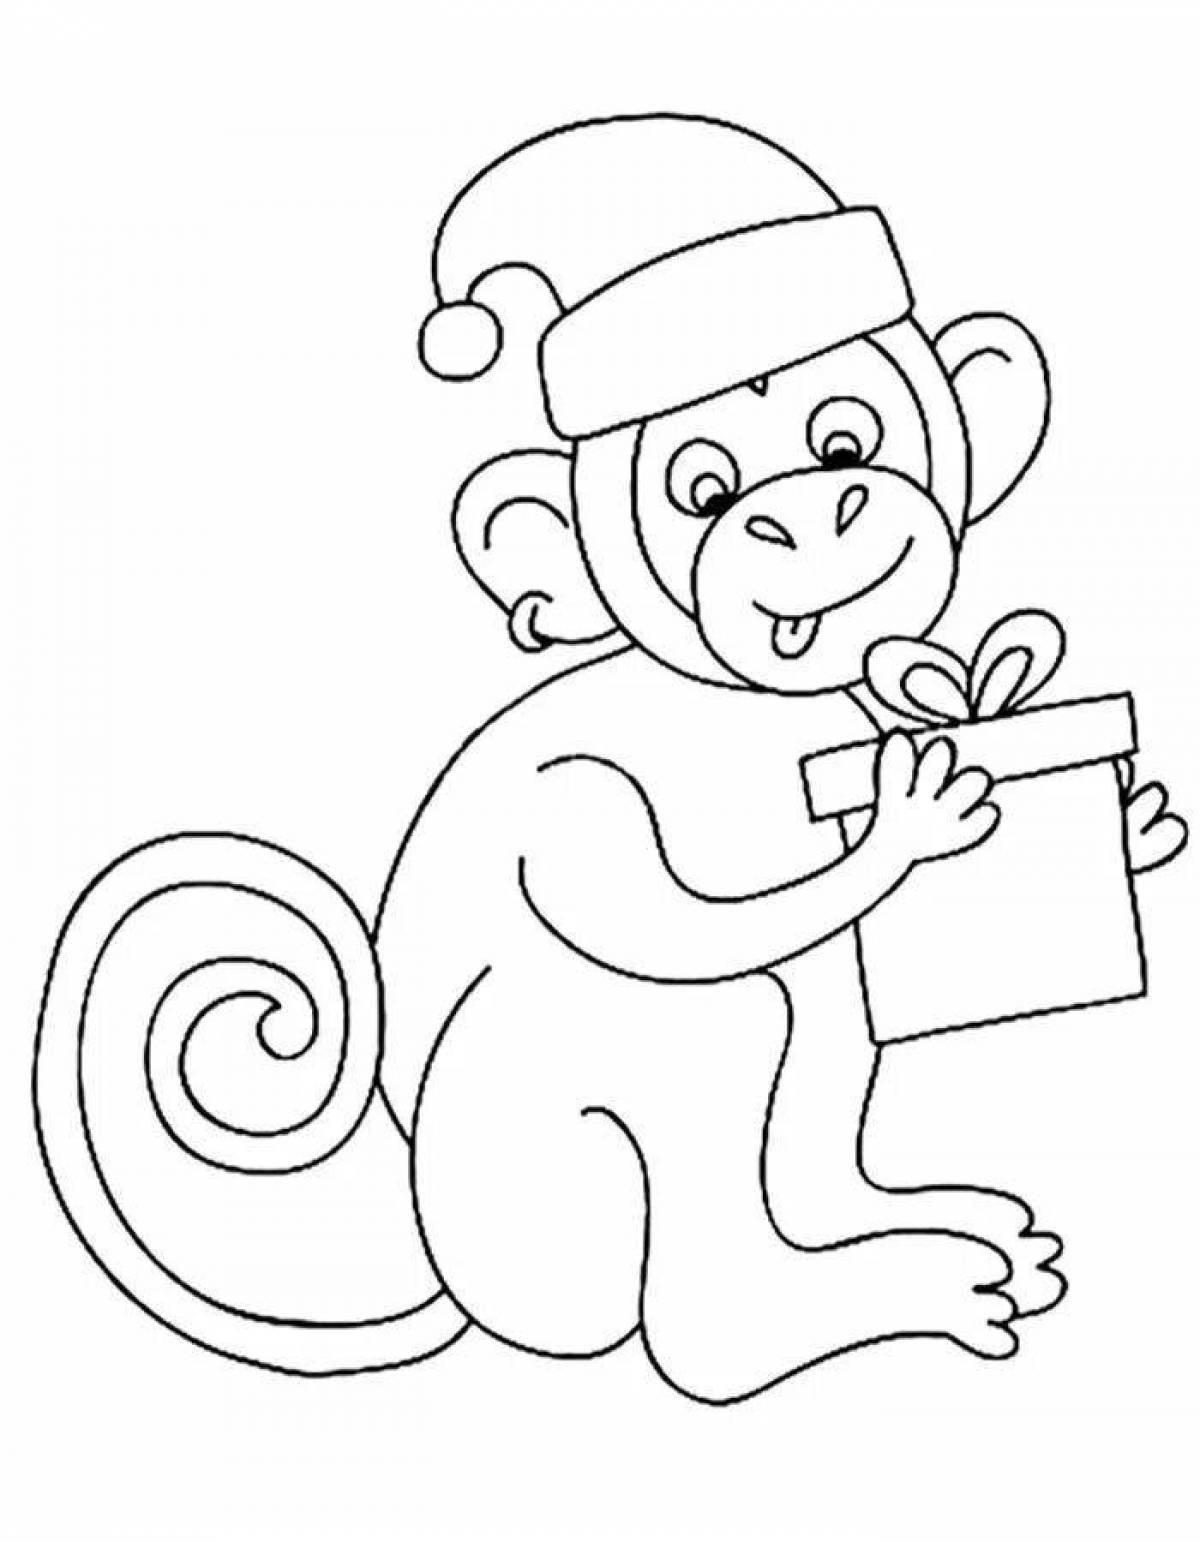 Witty monkey coloring book